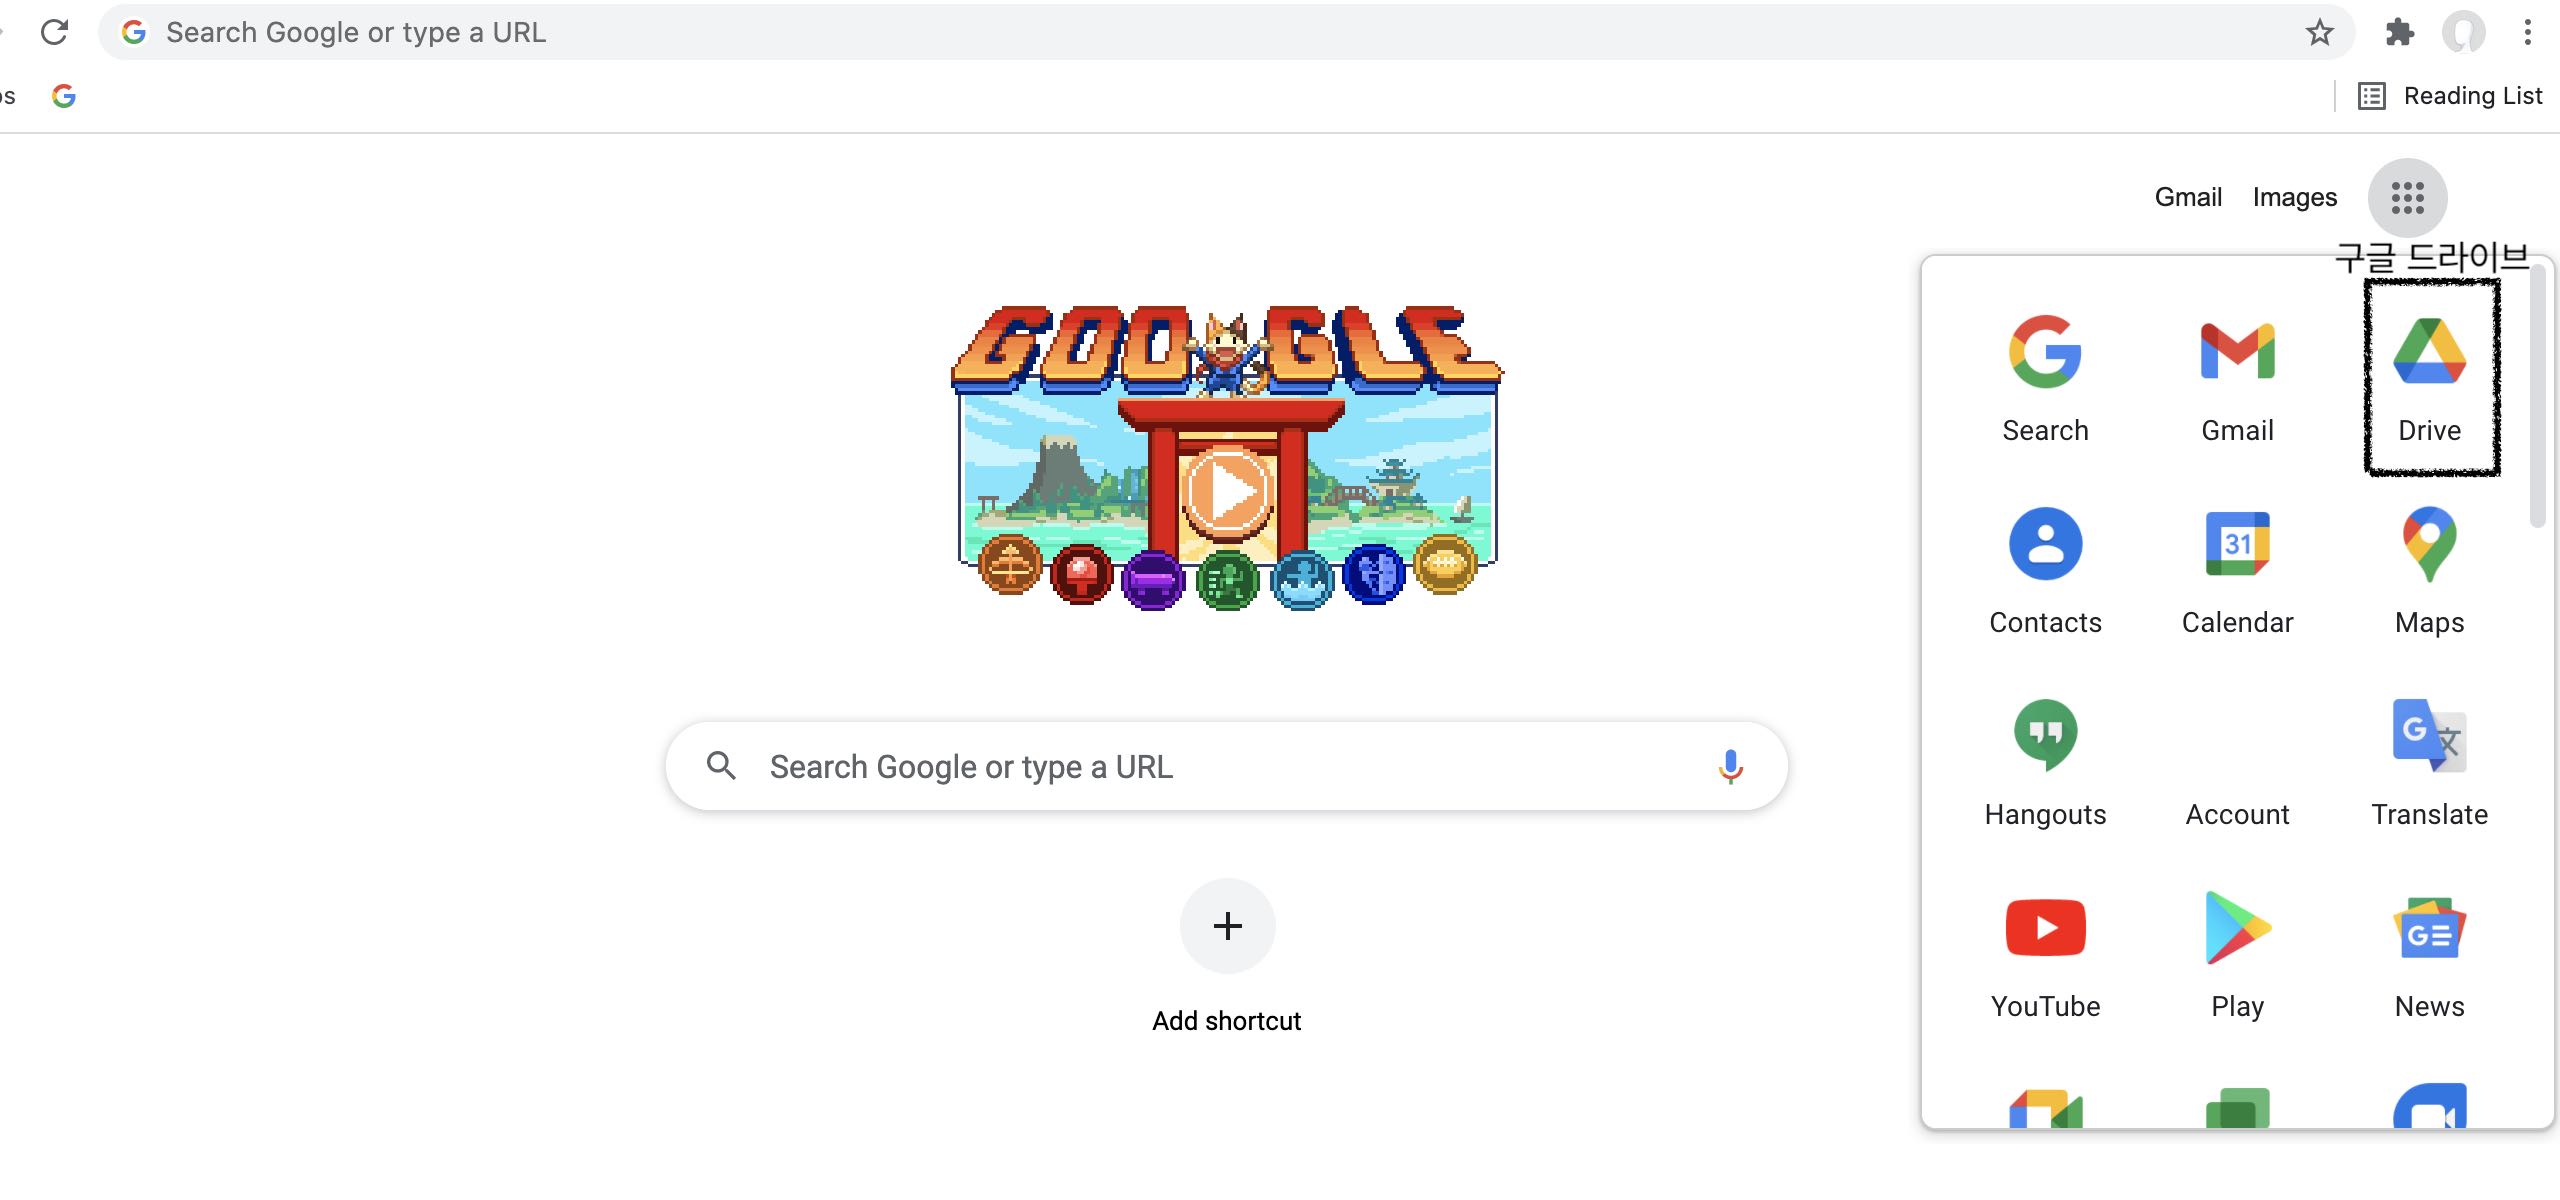 screenshot of Google home page, showing various services